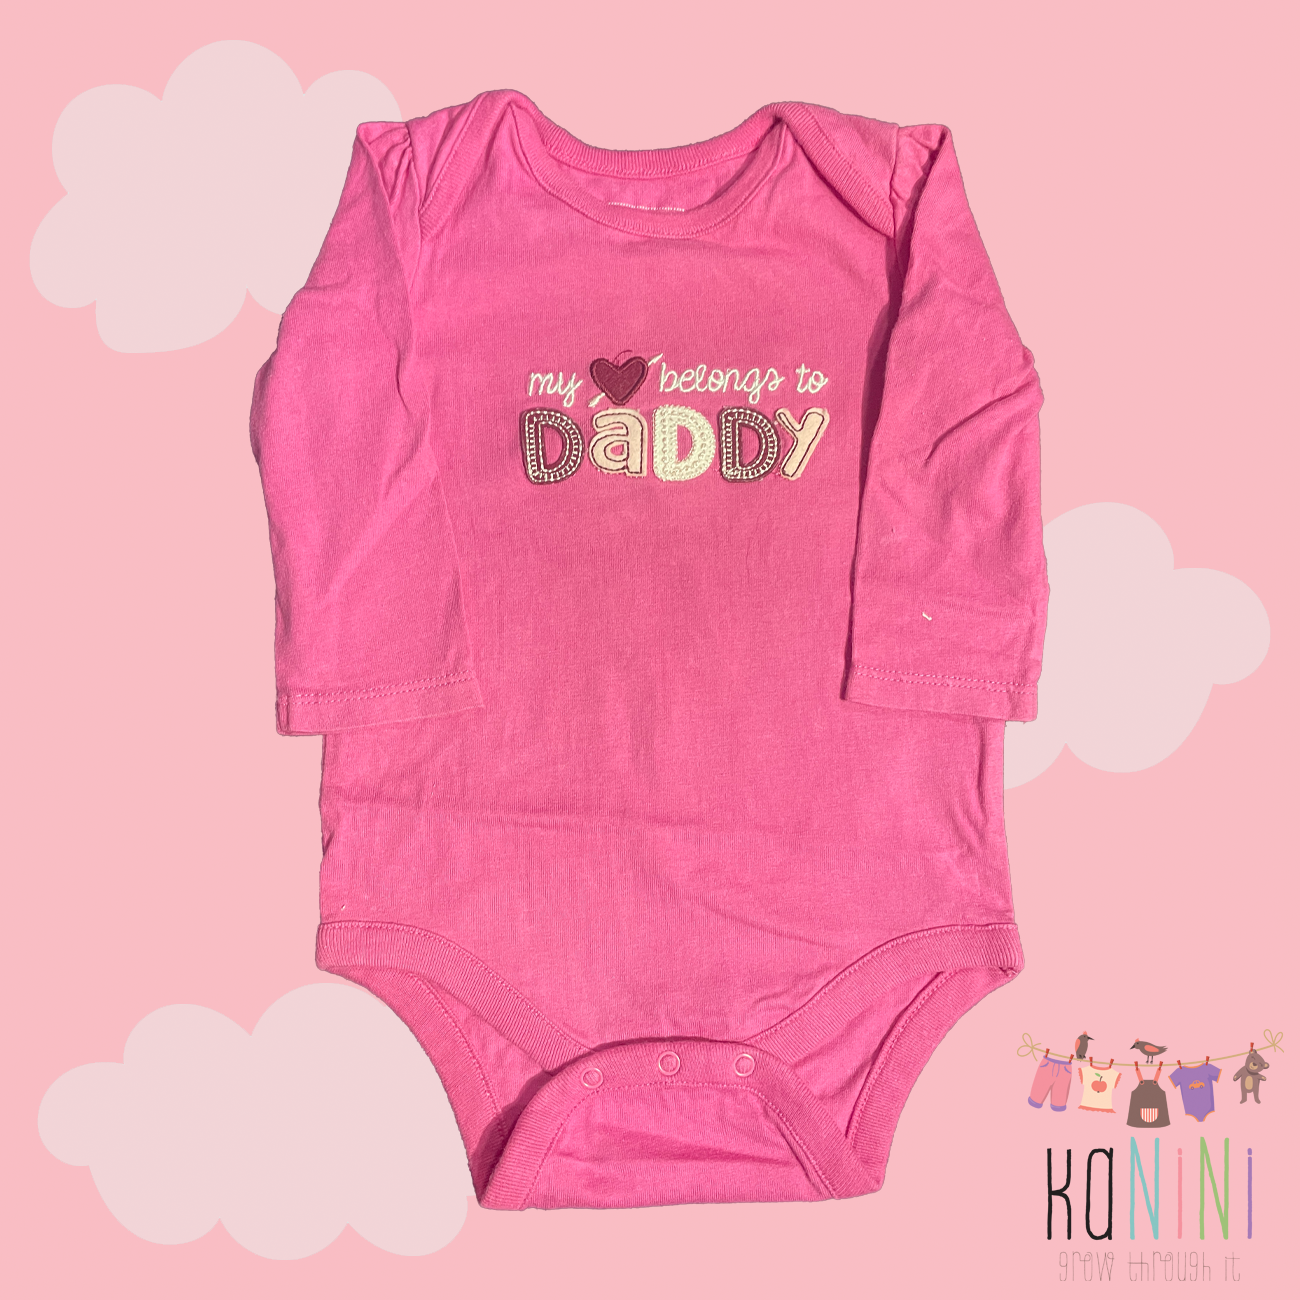 Featured image for “Baby GAP 3 - 6 Months Girls Long Sleeve Romper”